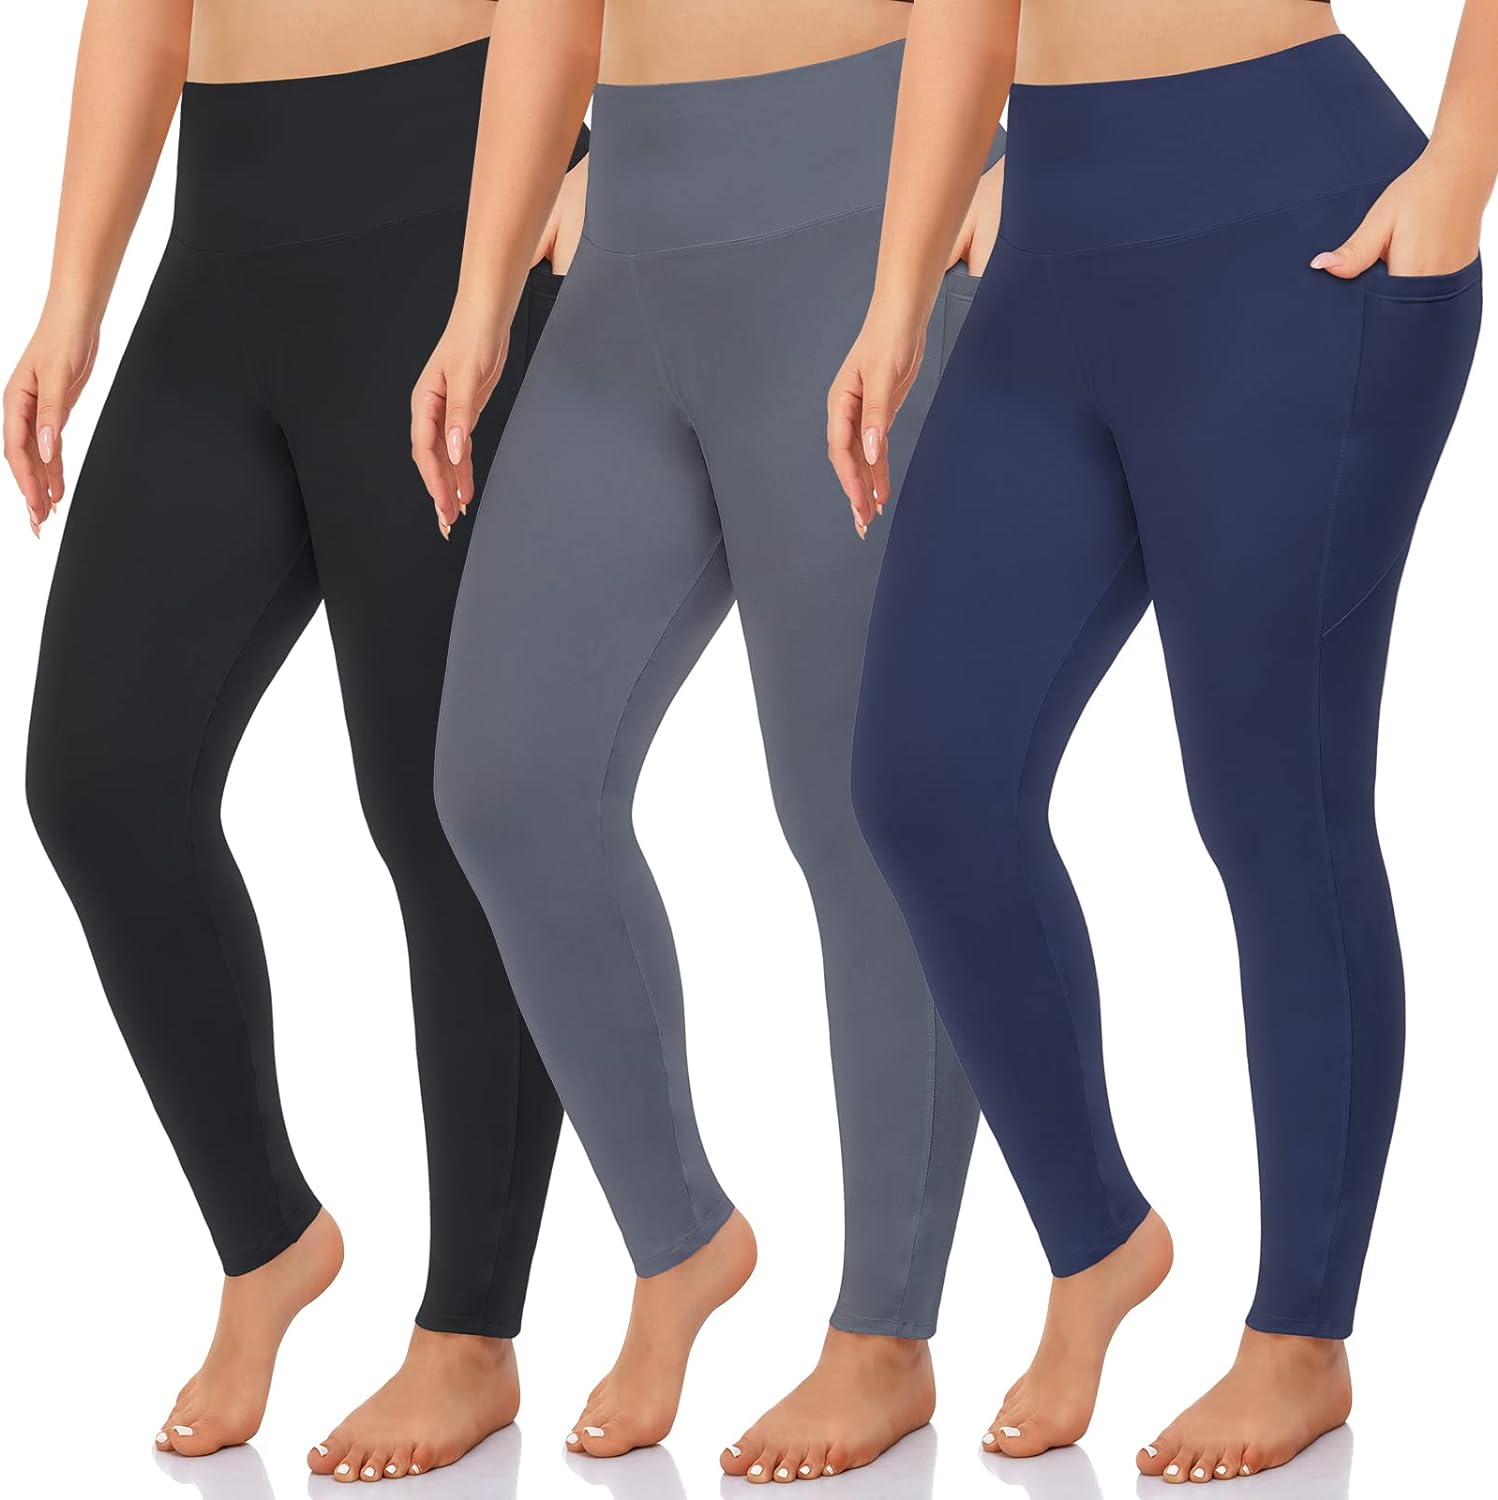 NEW YOUNG 3 Pack Plus Size Leggings with Pockets for Women,High Waist Tummy Control Workout Yoga Pants